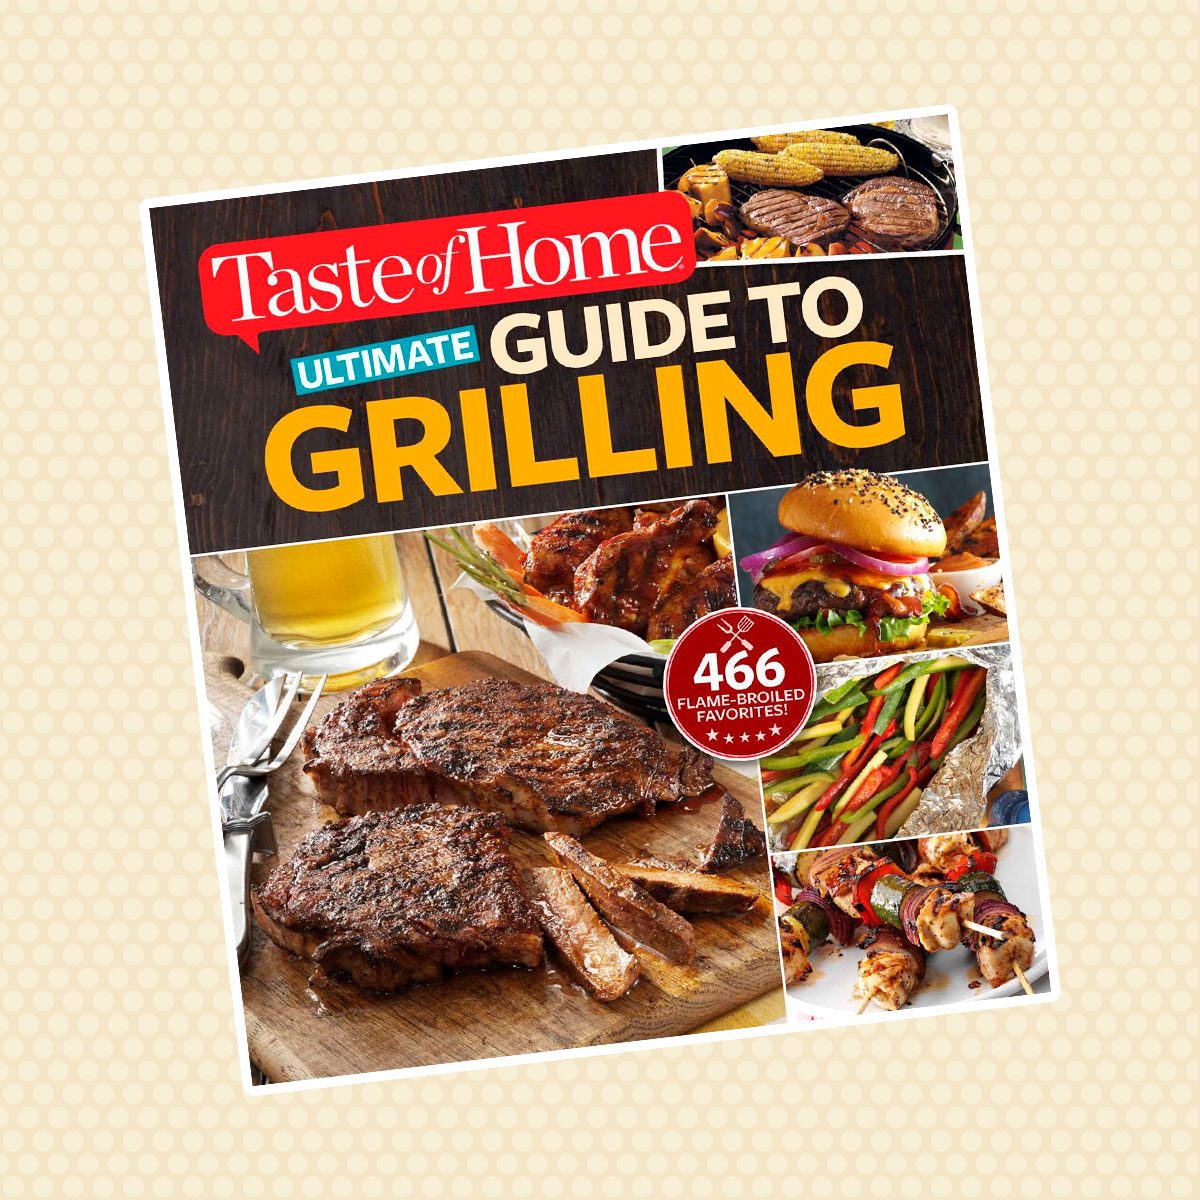 Taste of Home's Ultimate Guide to Grilling